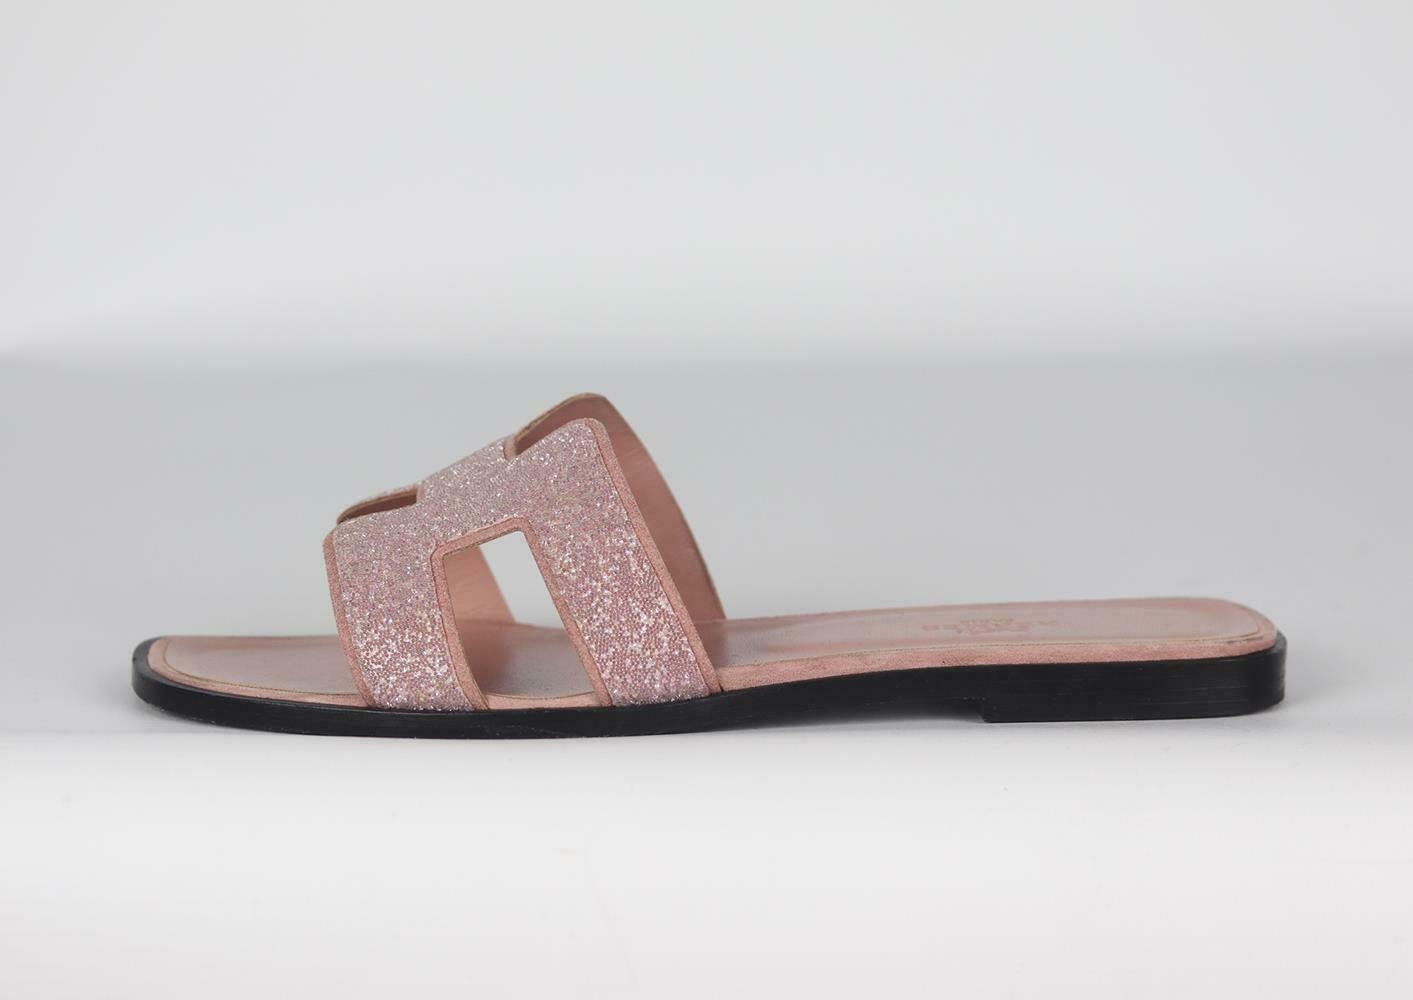 Hermès may specialize in luxury handbags, but the brand also designs great pieces that are suitable for everyday wear, these 'Oran' sandals are made from soft dusty-pink suede and leather and embellished with matching crystal on the top and has a